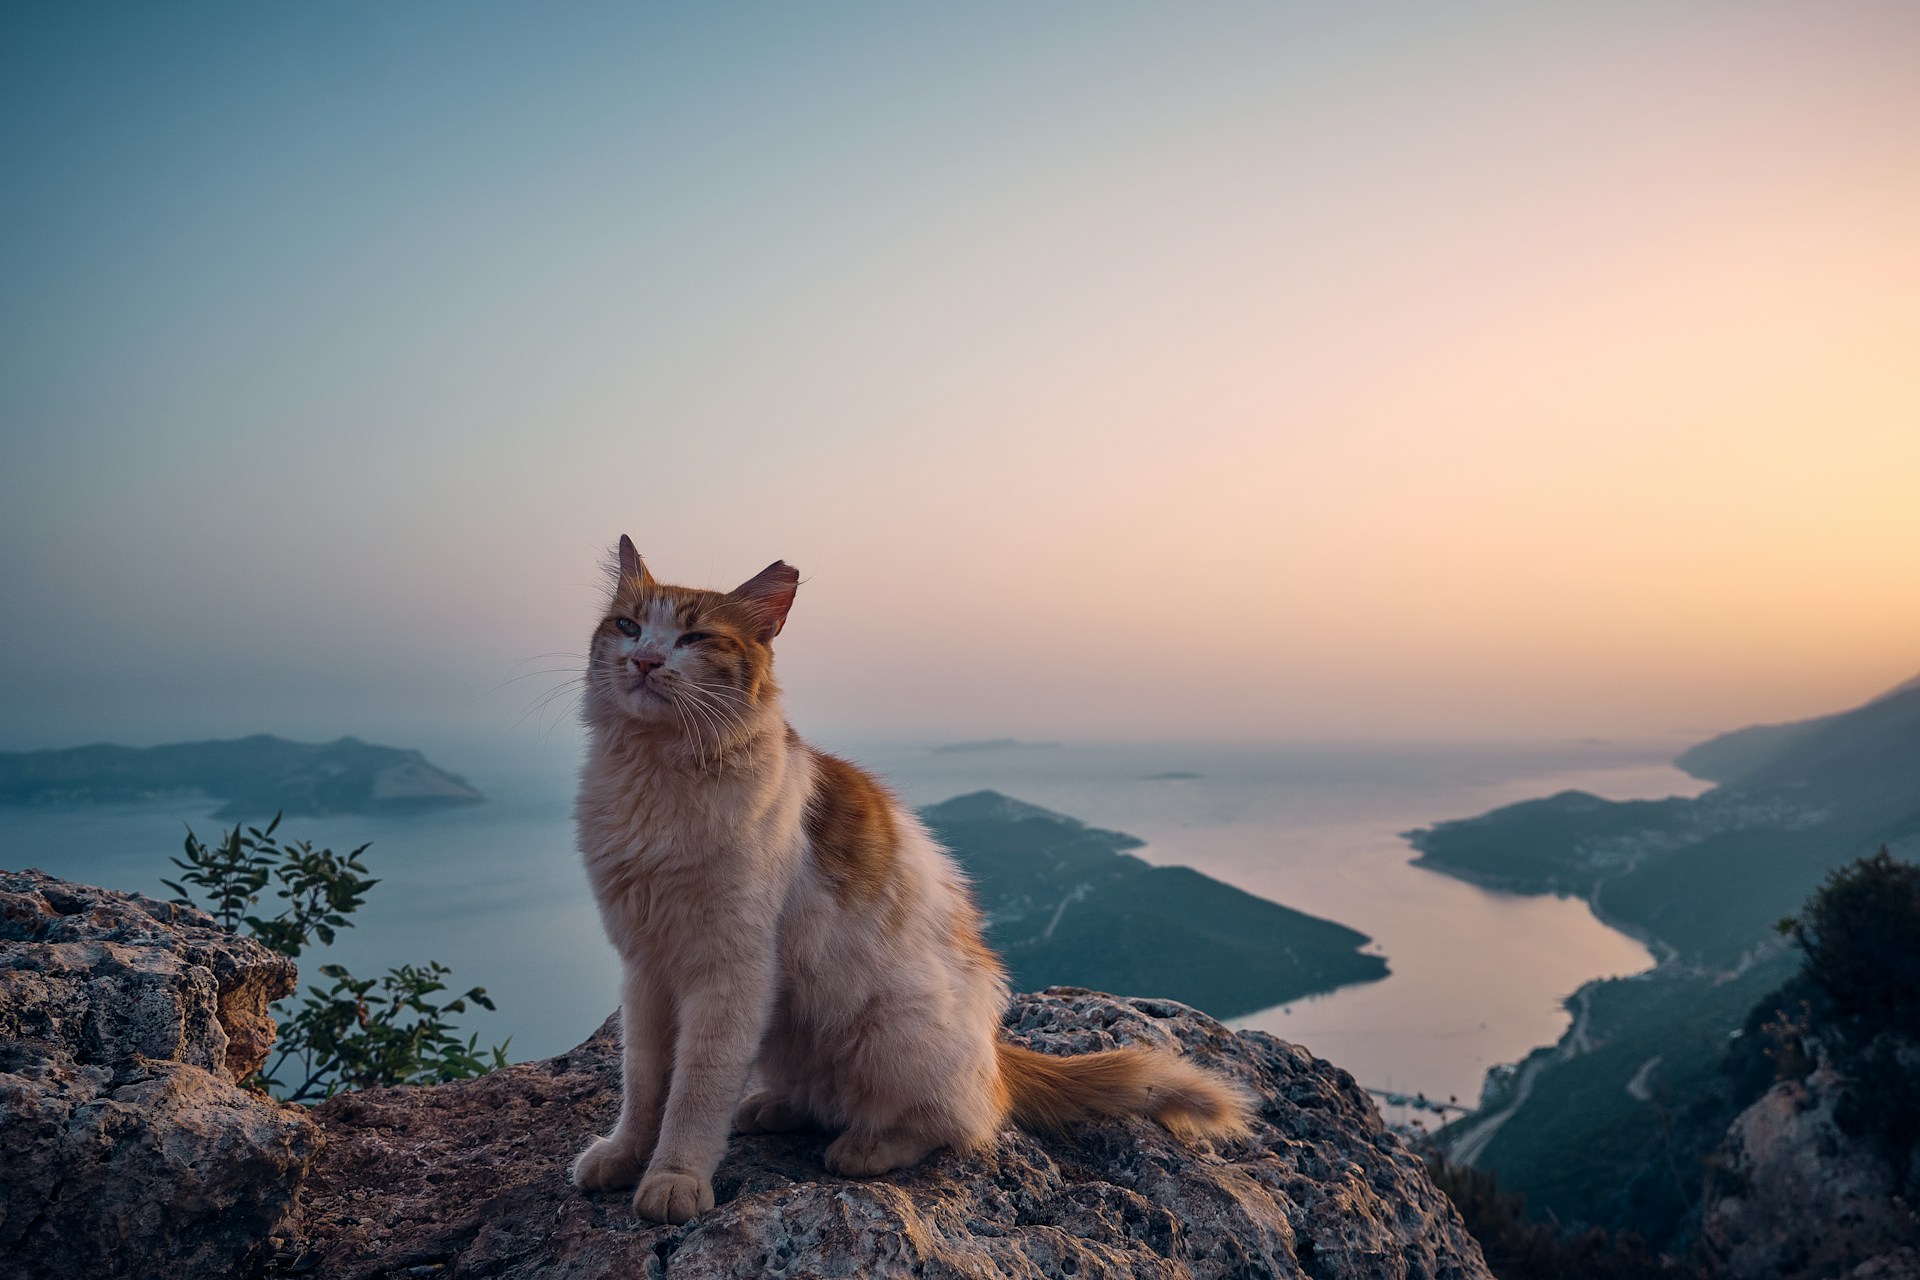 An outdoor cat sitting on a cliff overlooking the sea